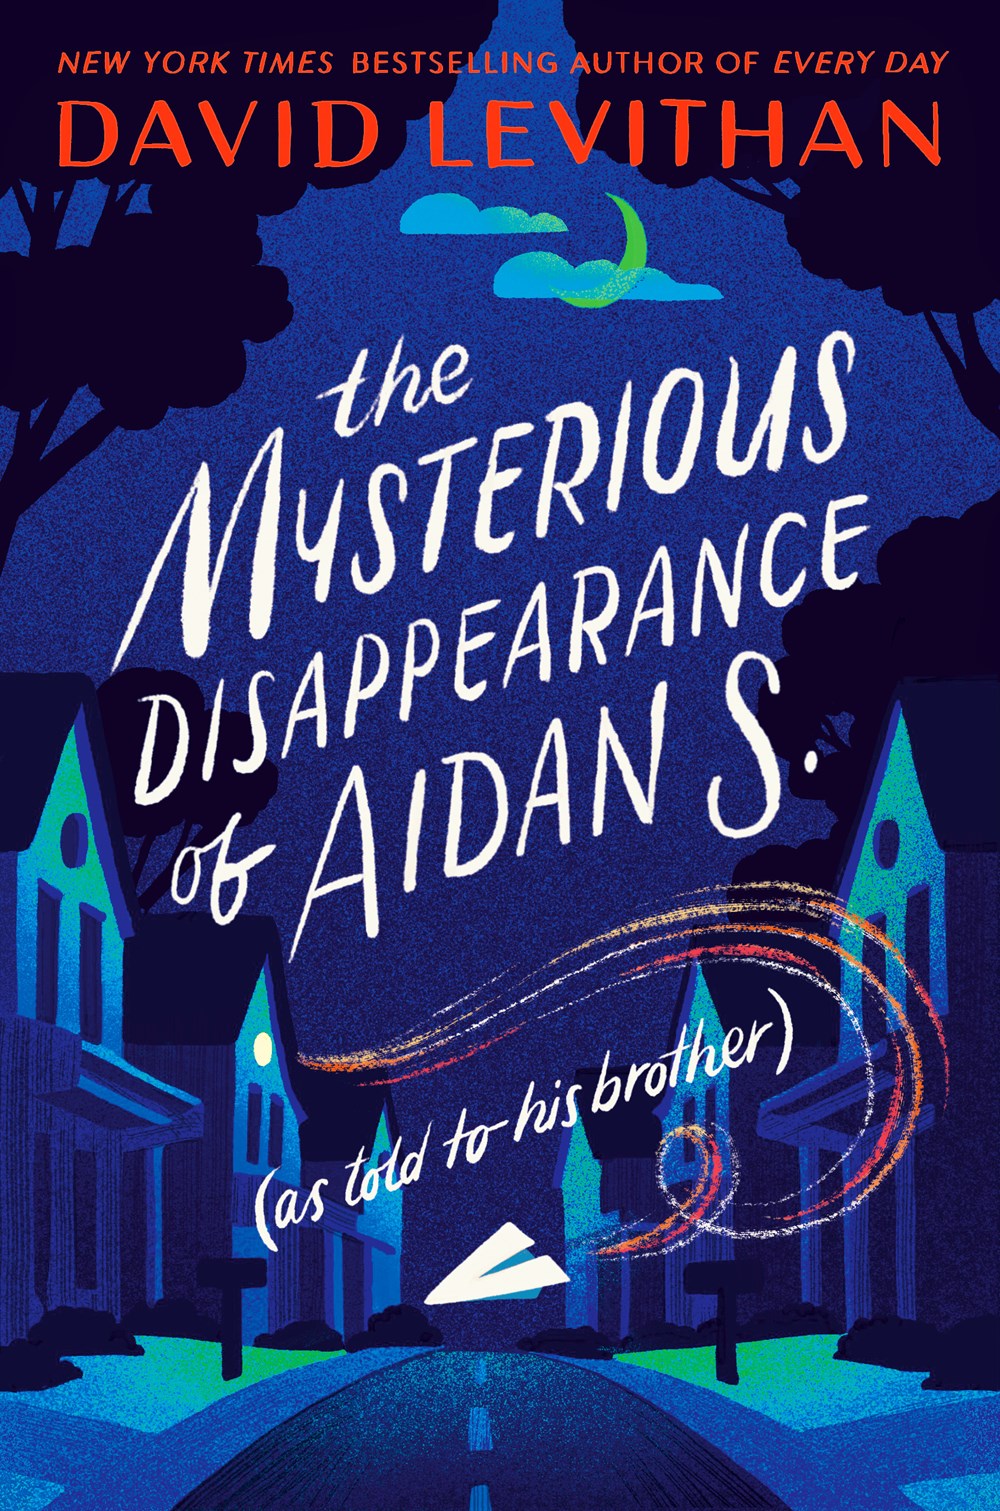 David Levithan: The Mysterious Disappearance of Aidan S. (2021, Knopf Books for Young Readers)